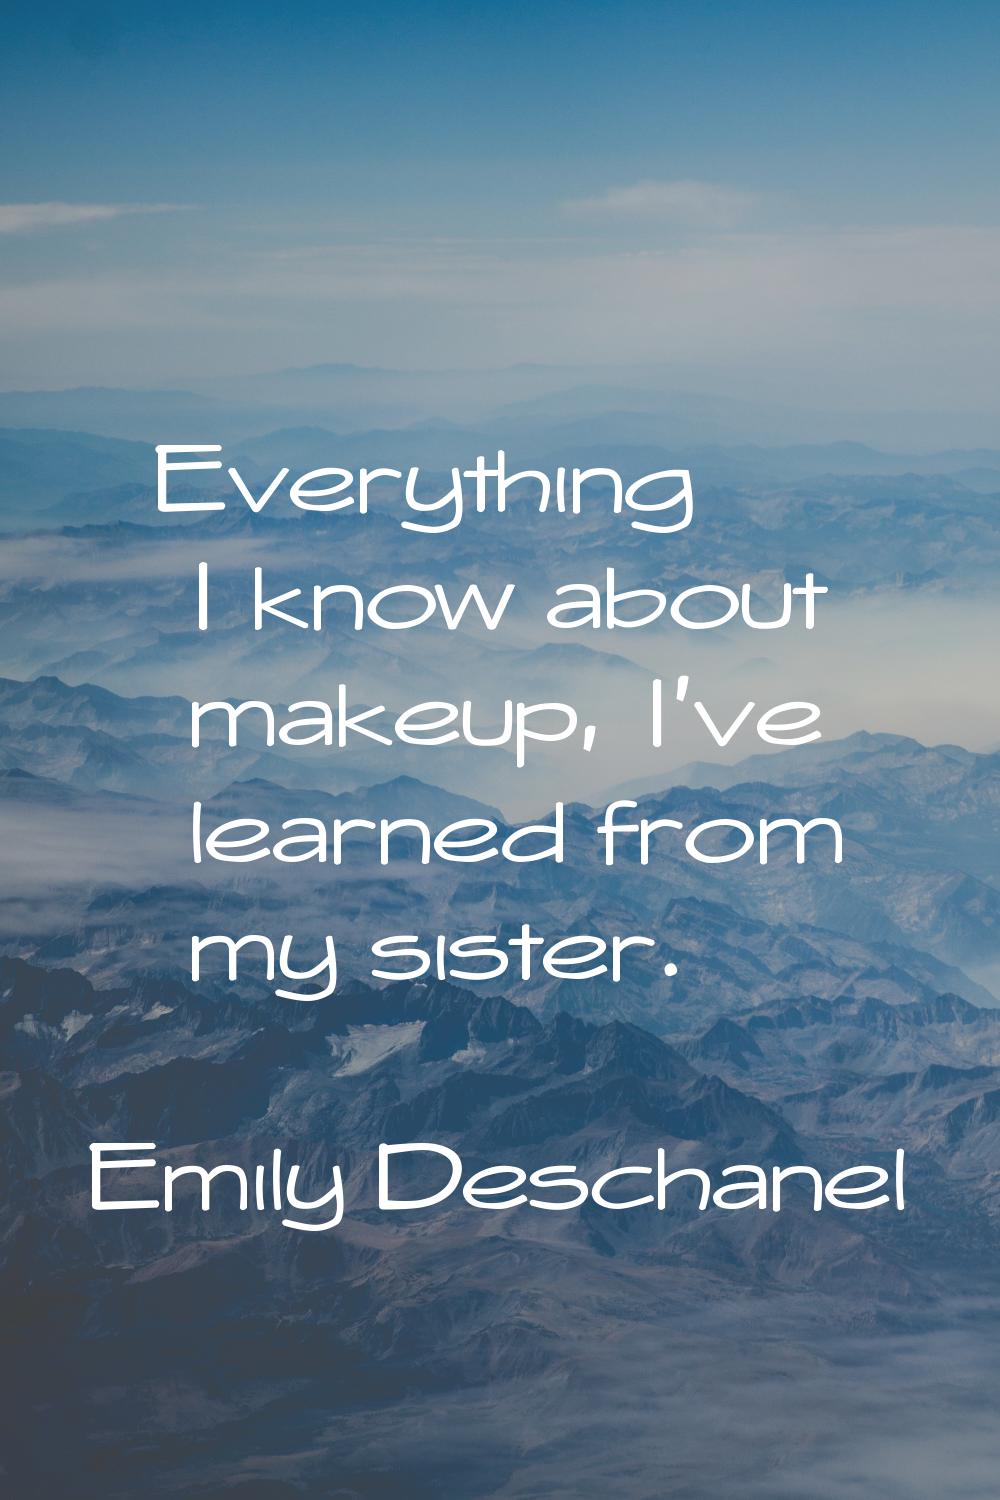 Everything I know about makeup, I've learned from my sister.